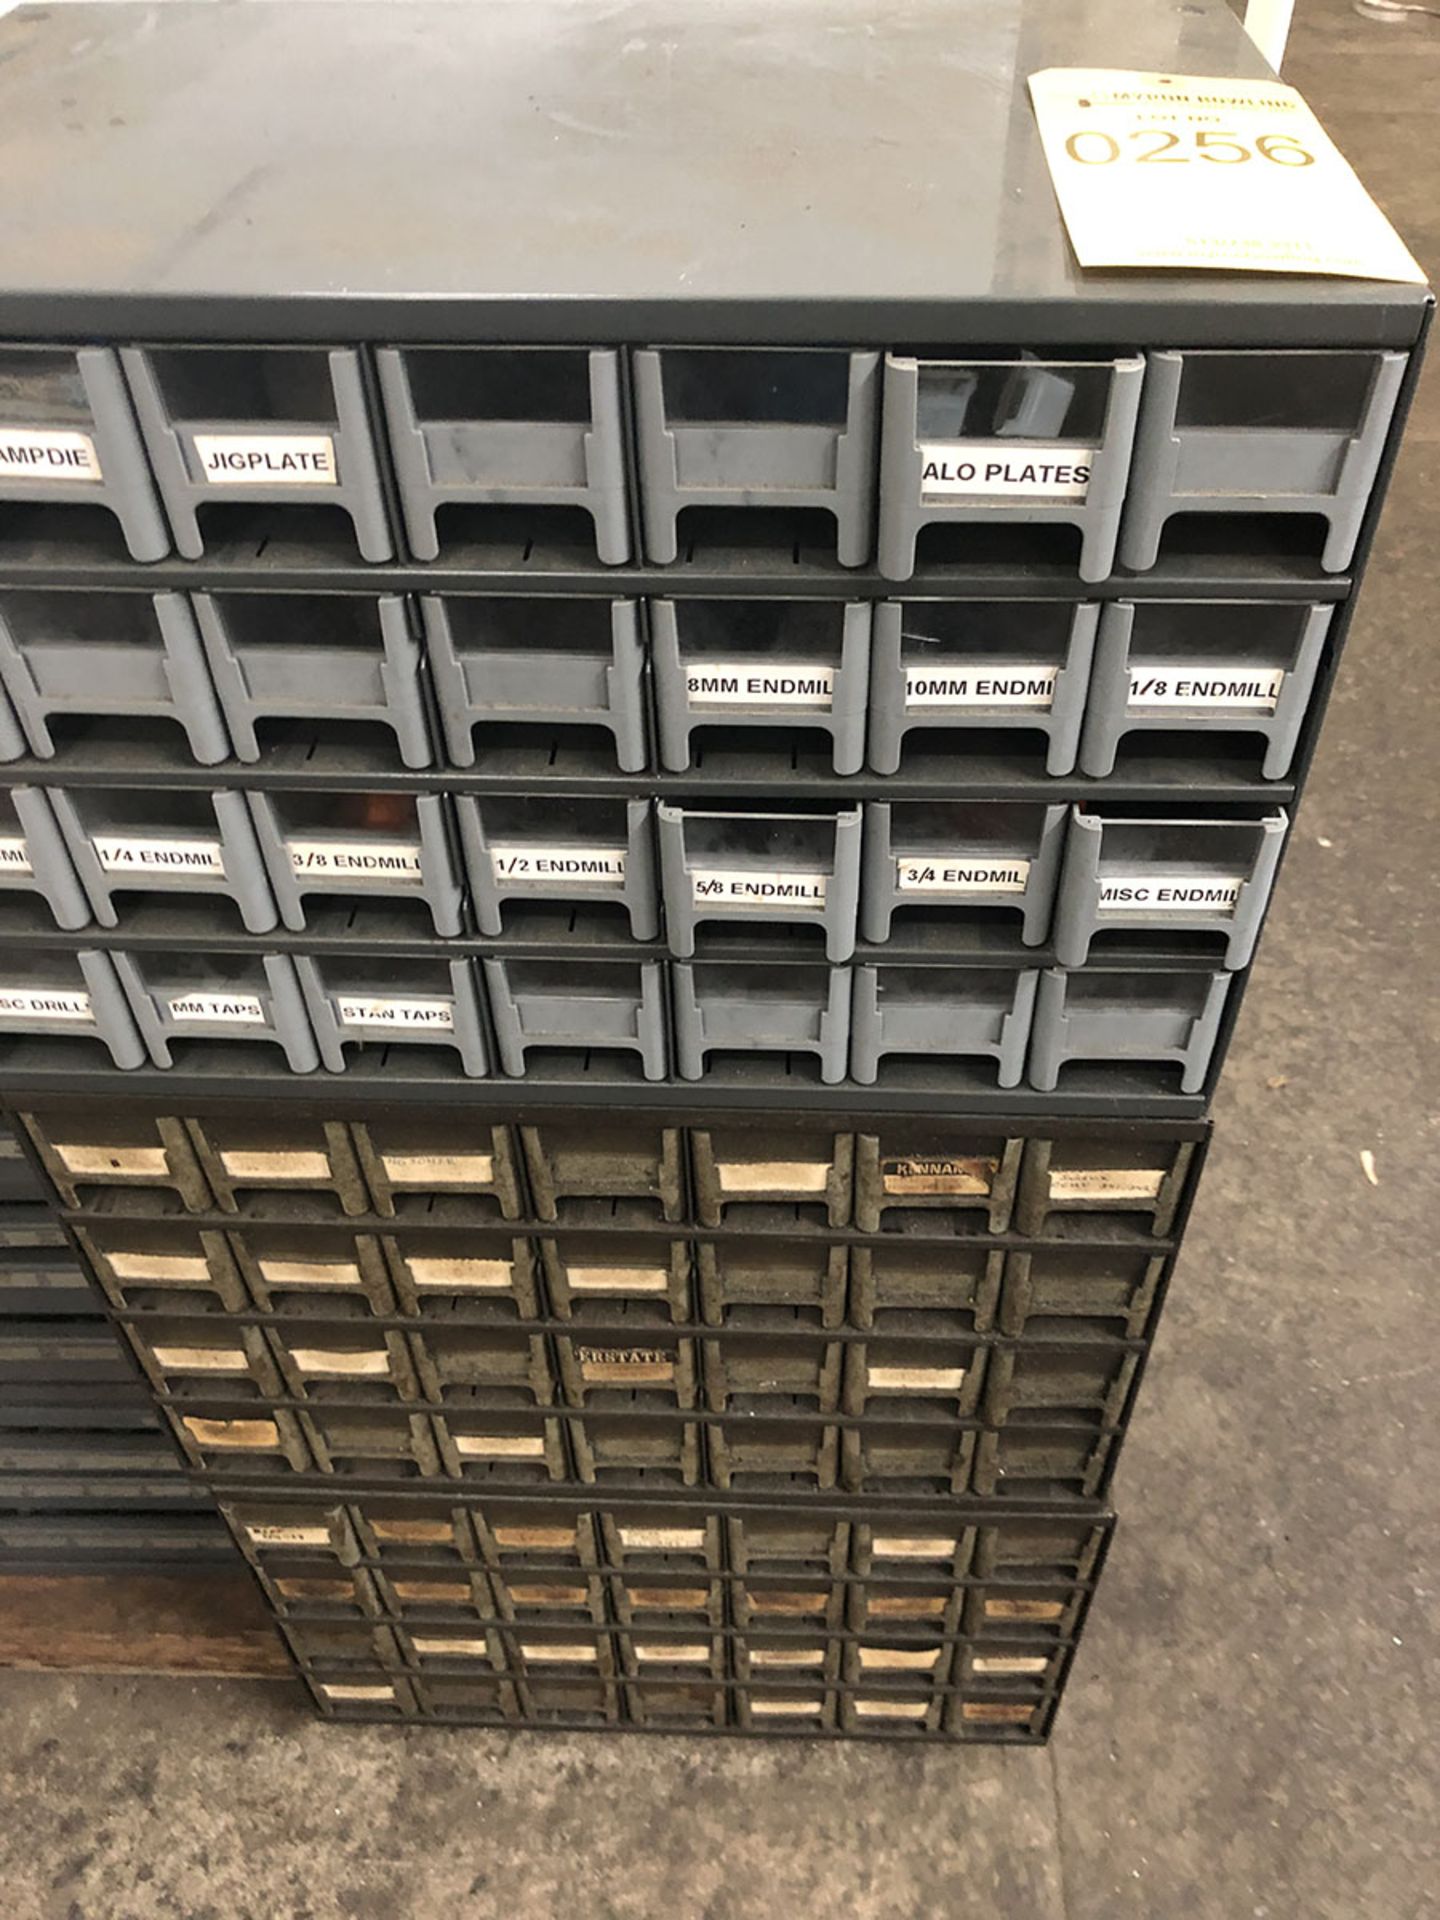 PARTS CABINET WITH CONTENTS